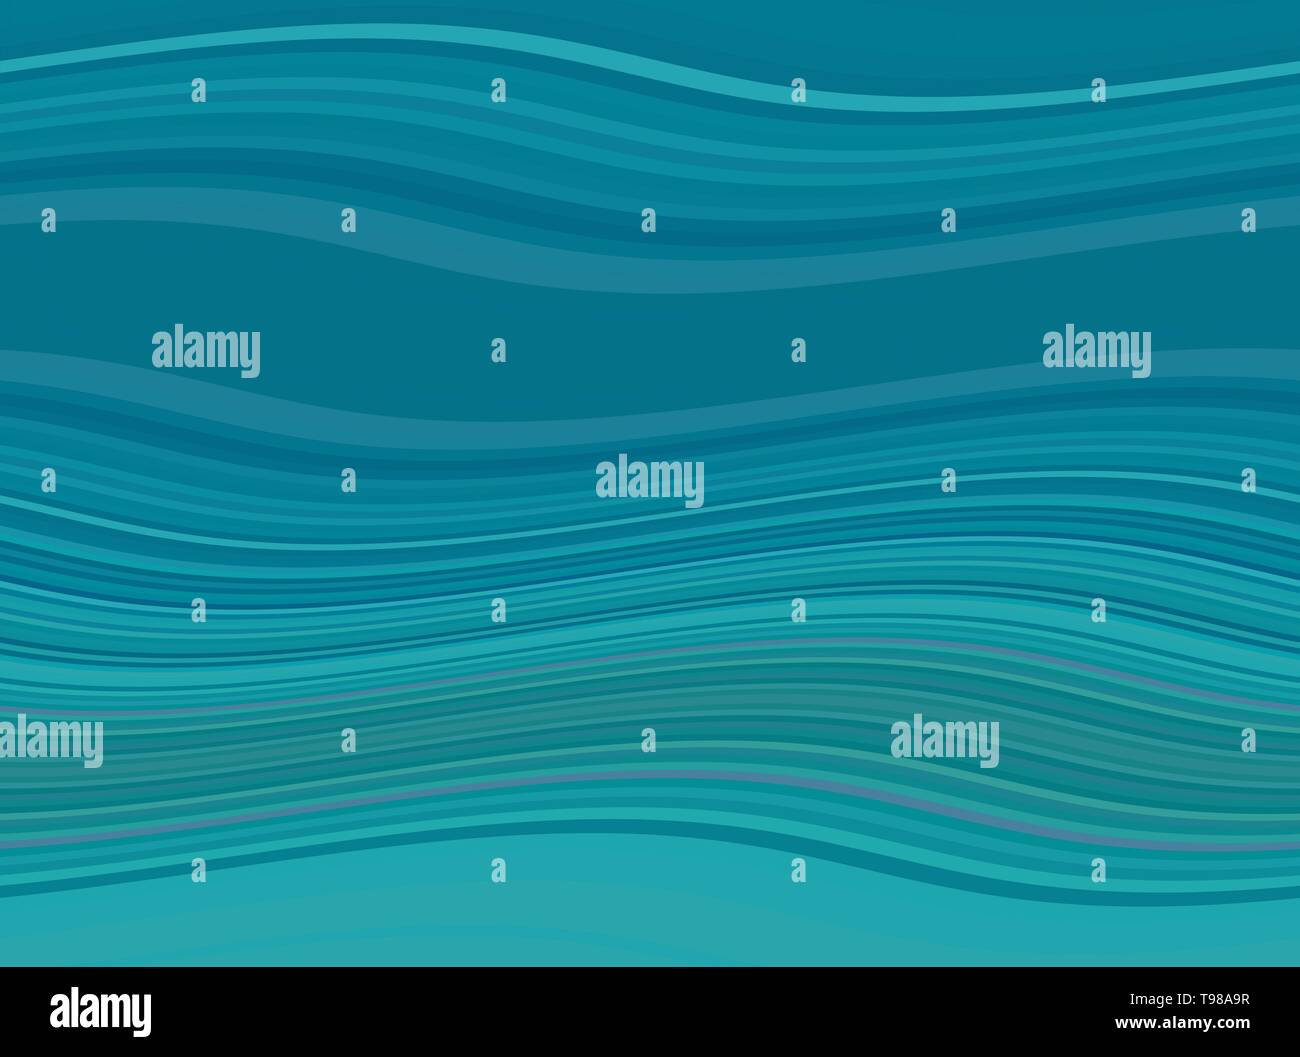 abstract dark cyan, light sea green and blue chill color ocean waves  background. can be used for wallpaper, presentation, graphic illustration  or text Stock Photo - Alamy